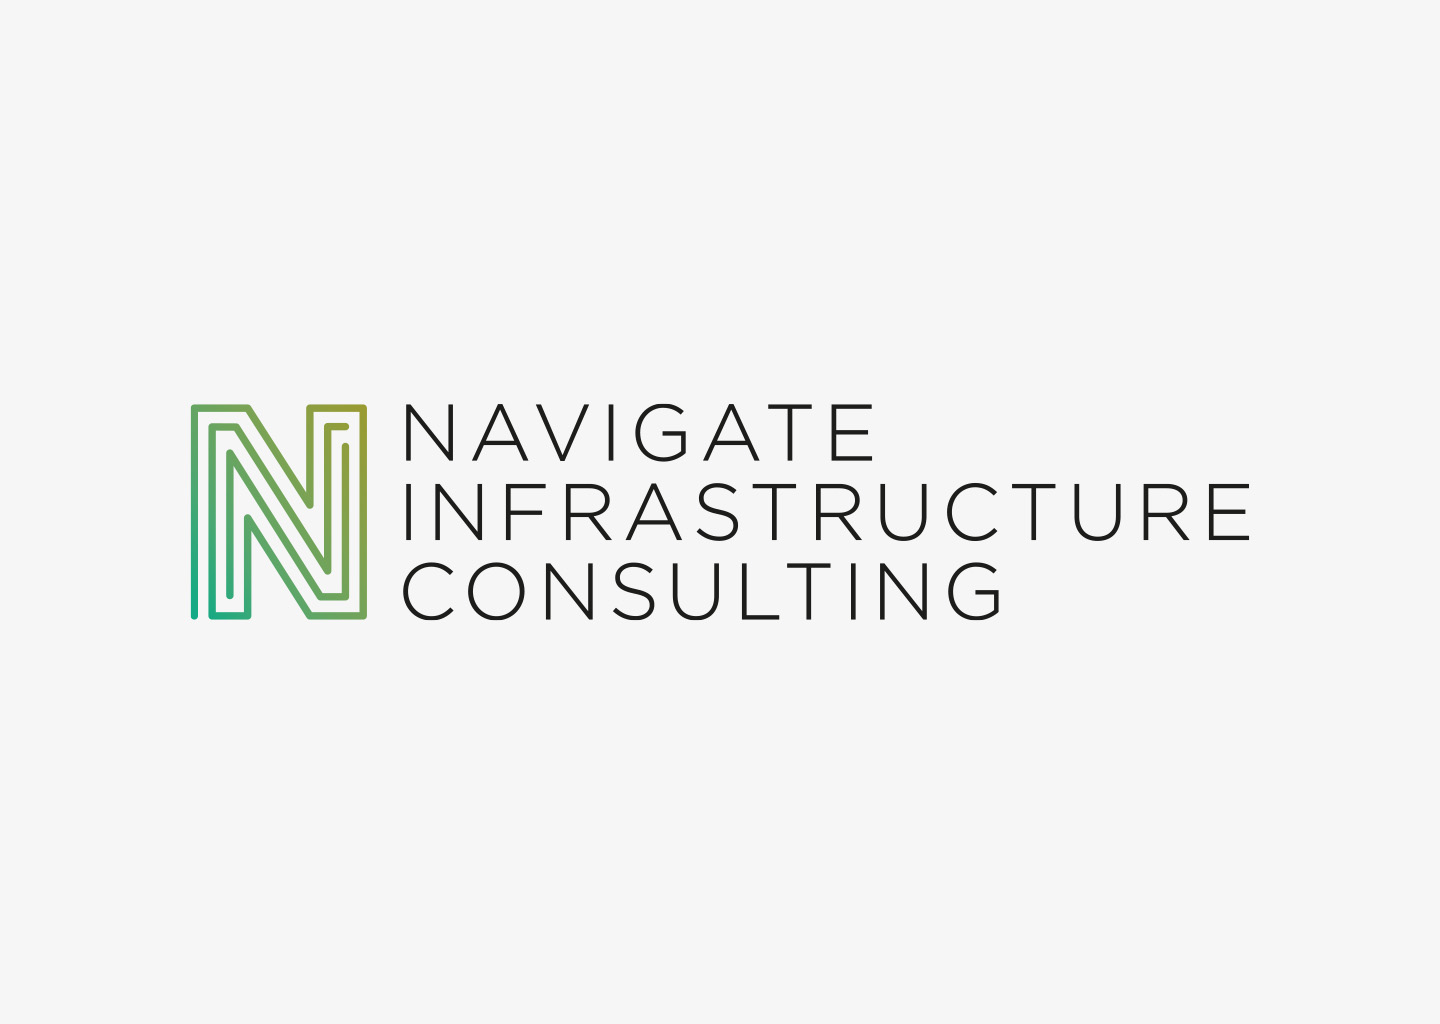 Navigate Infrastructure Consulting logo